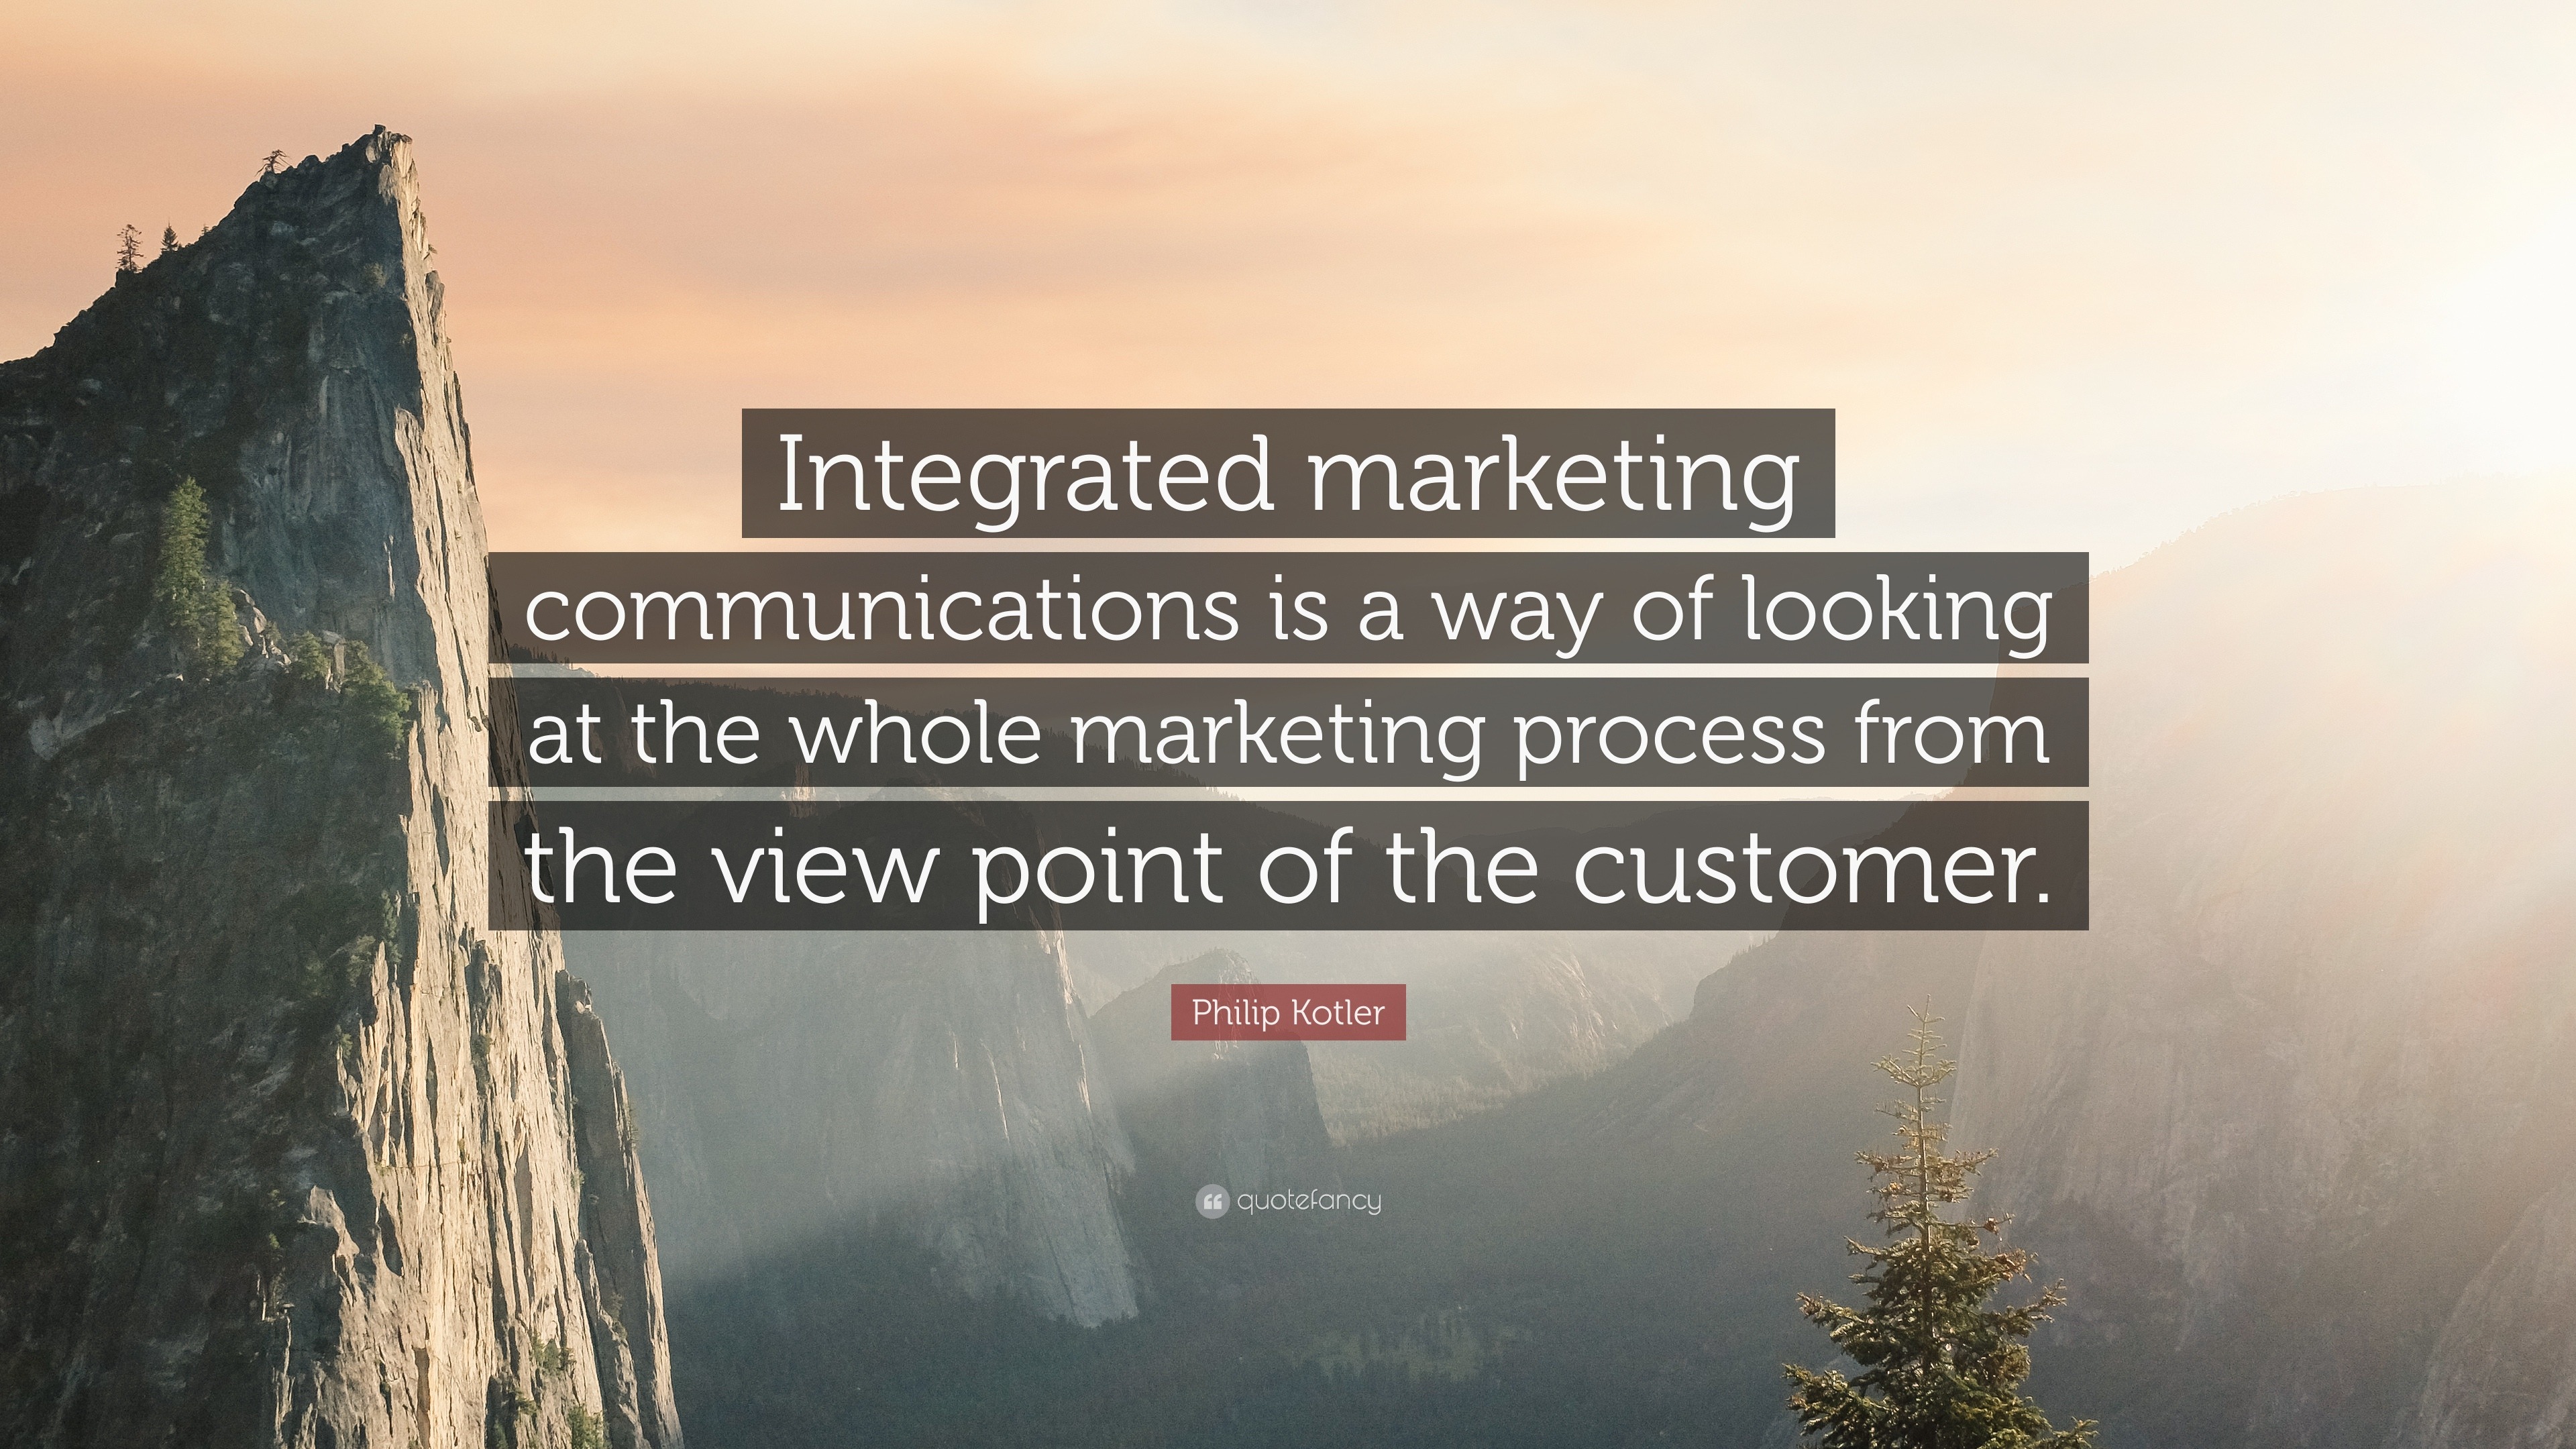 Philip Kotler Quote: "Integrated marketing communications ...